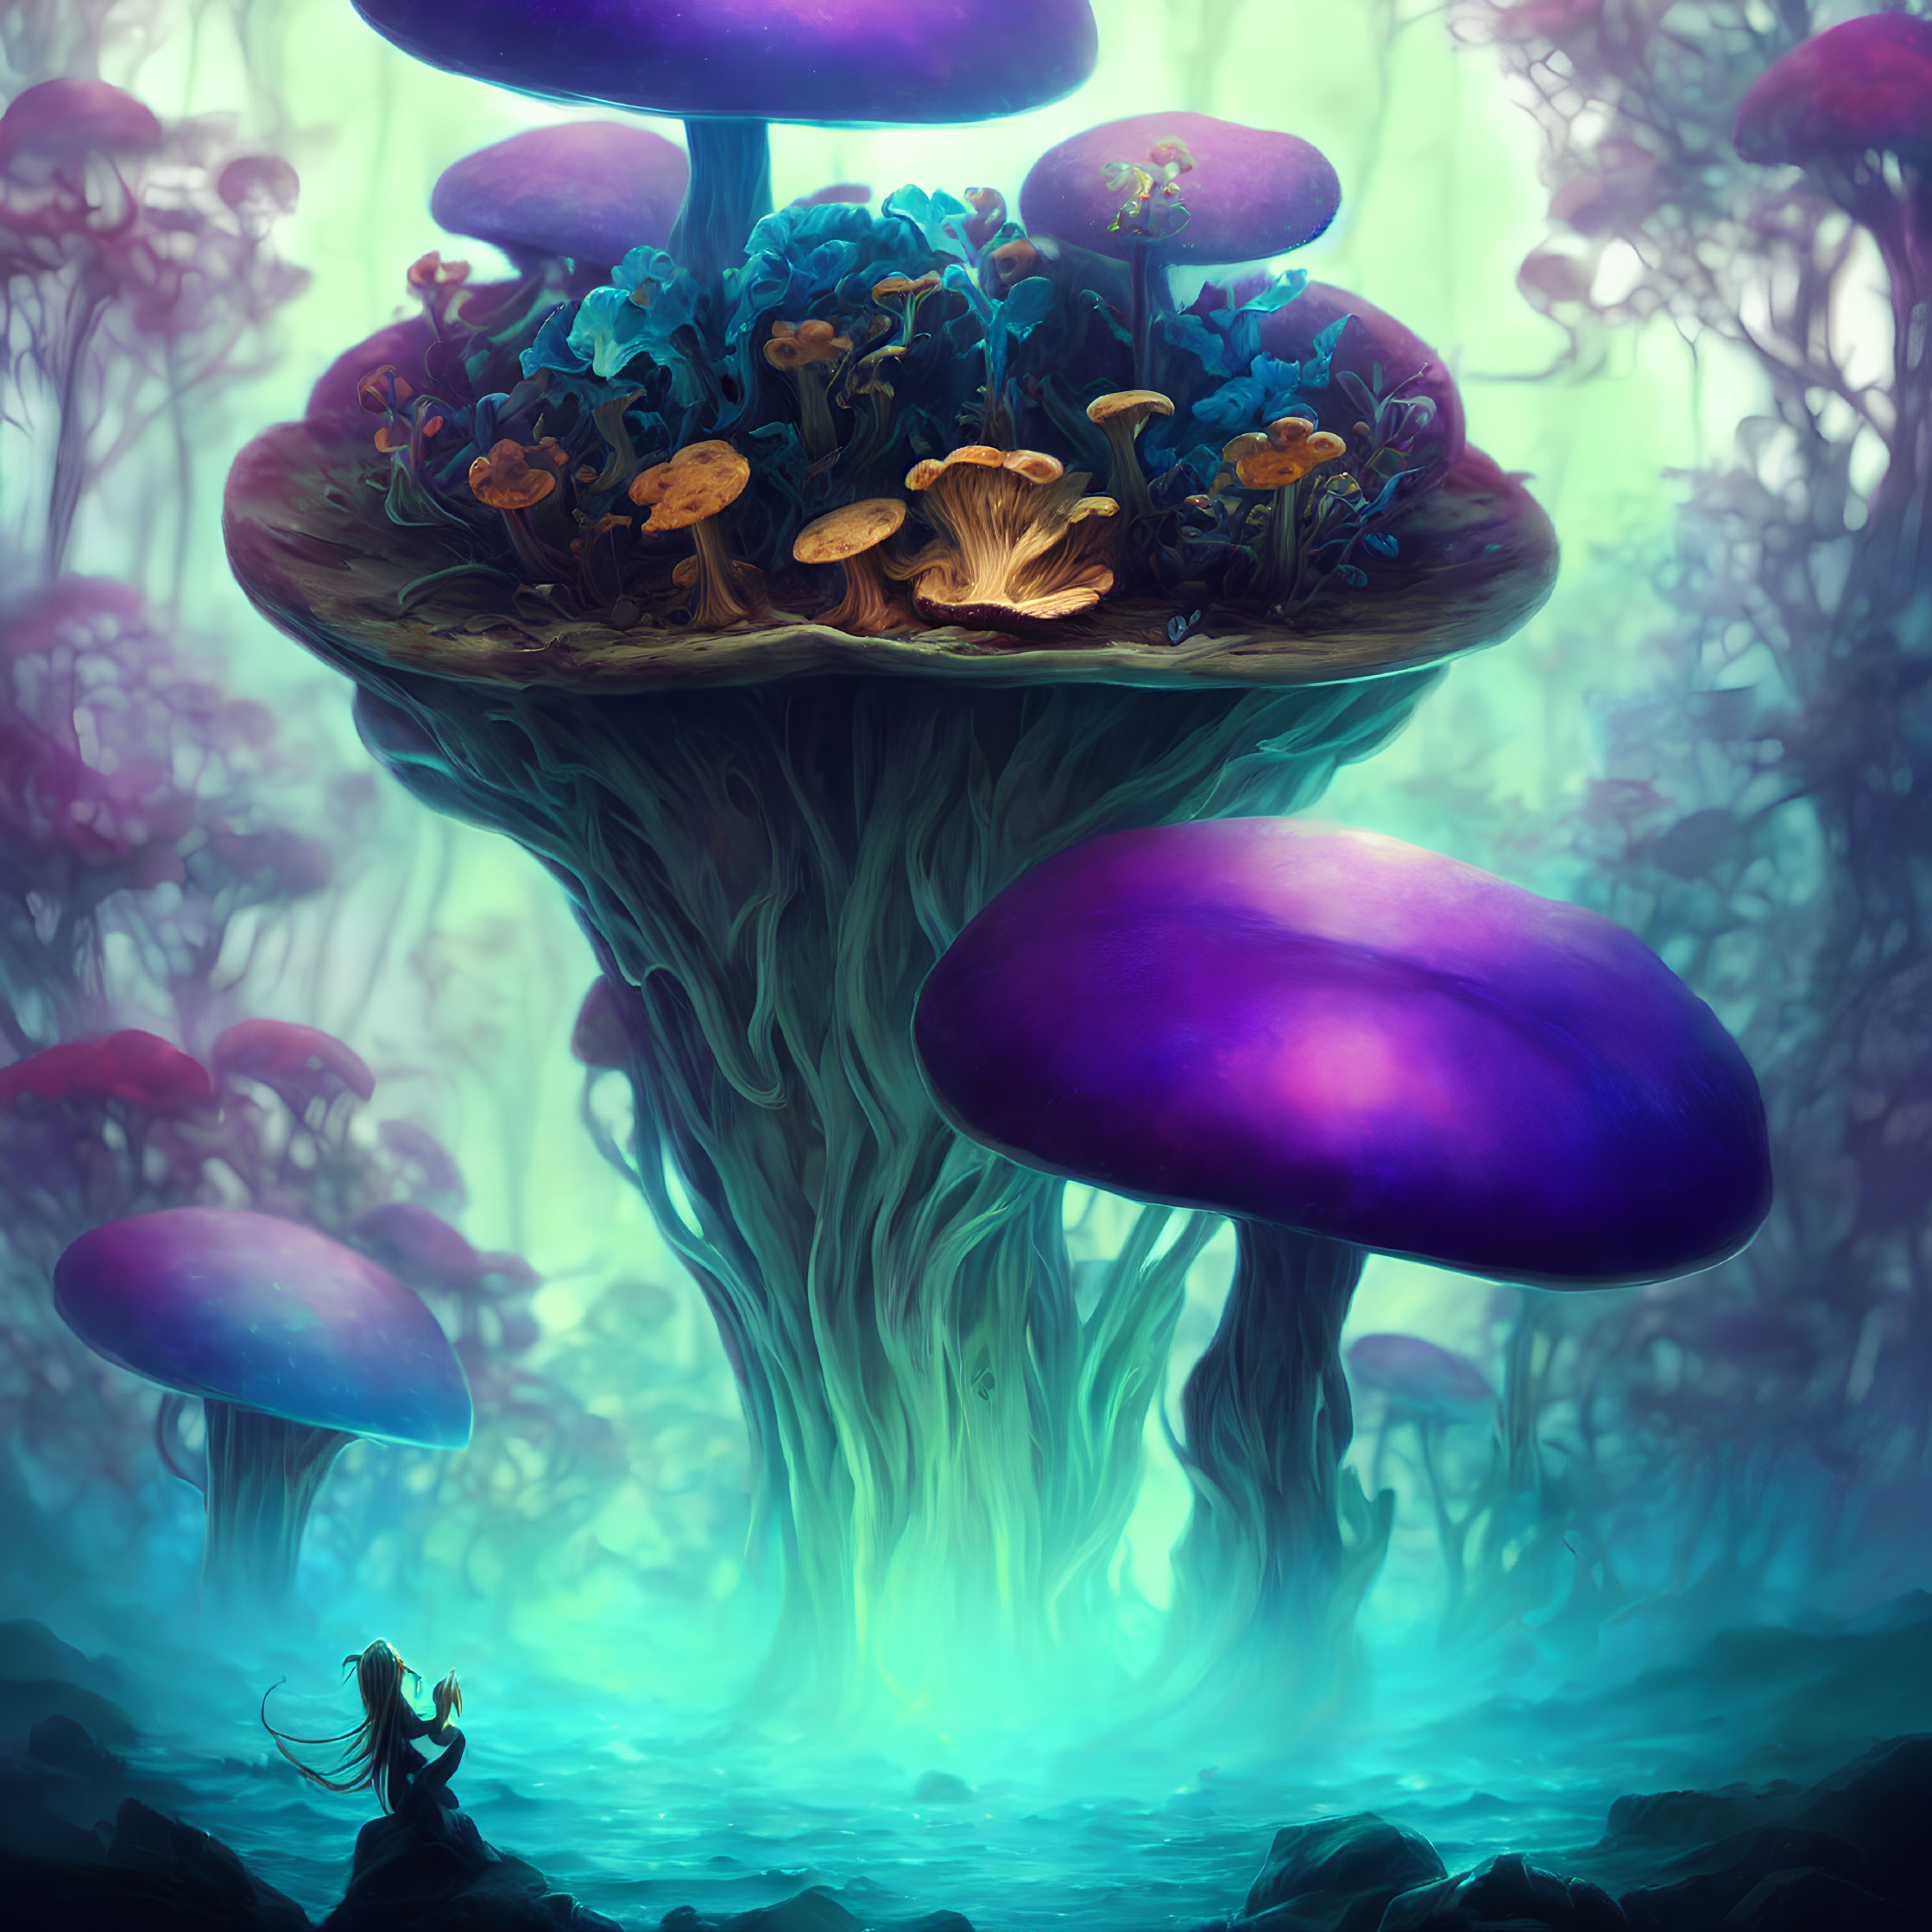 Enchanted forest with oversized luminescent mushrooms and tiny humanoid figure in ethereal hues